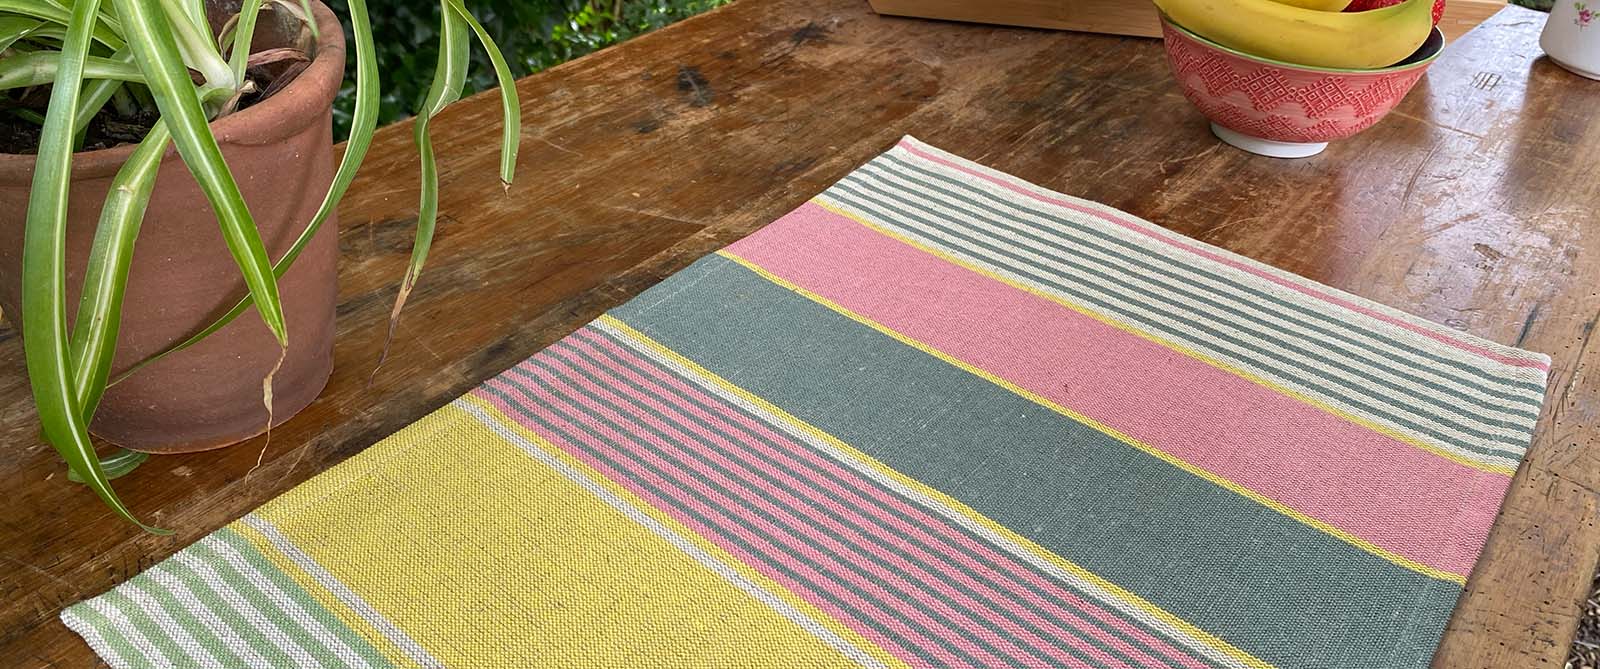 Blue, Sand, Turquoise Striped Linen Place Mats - set of 4